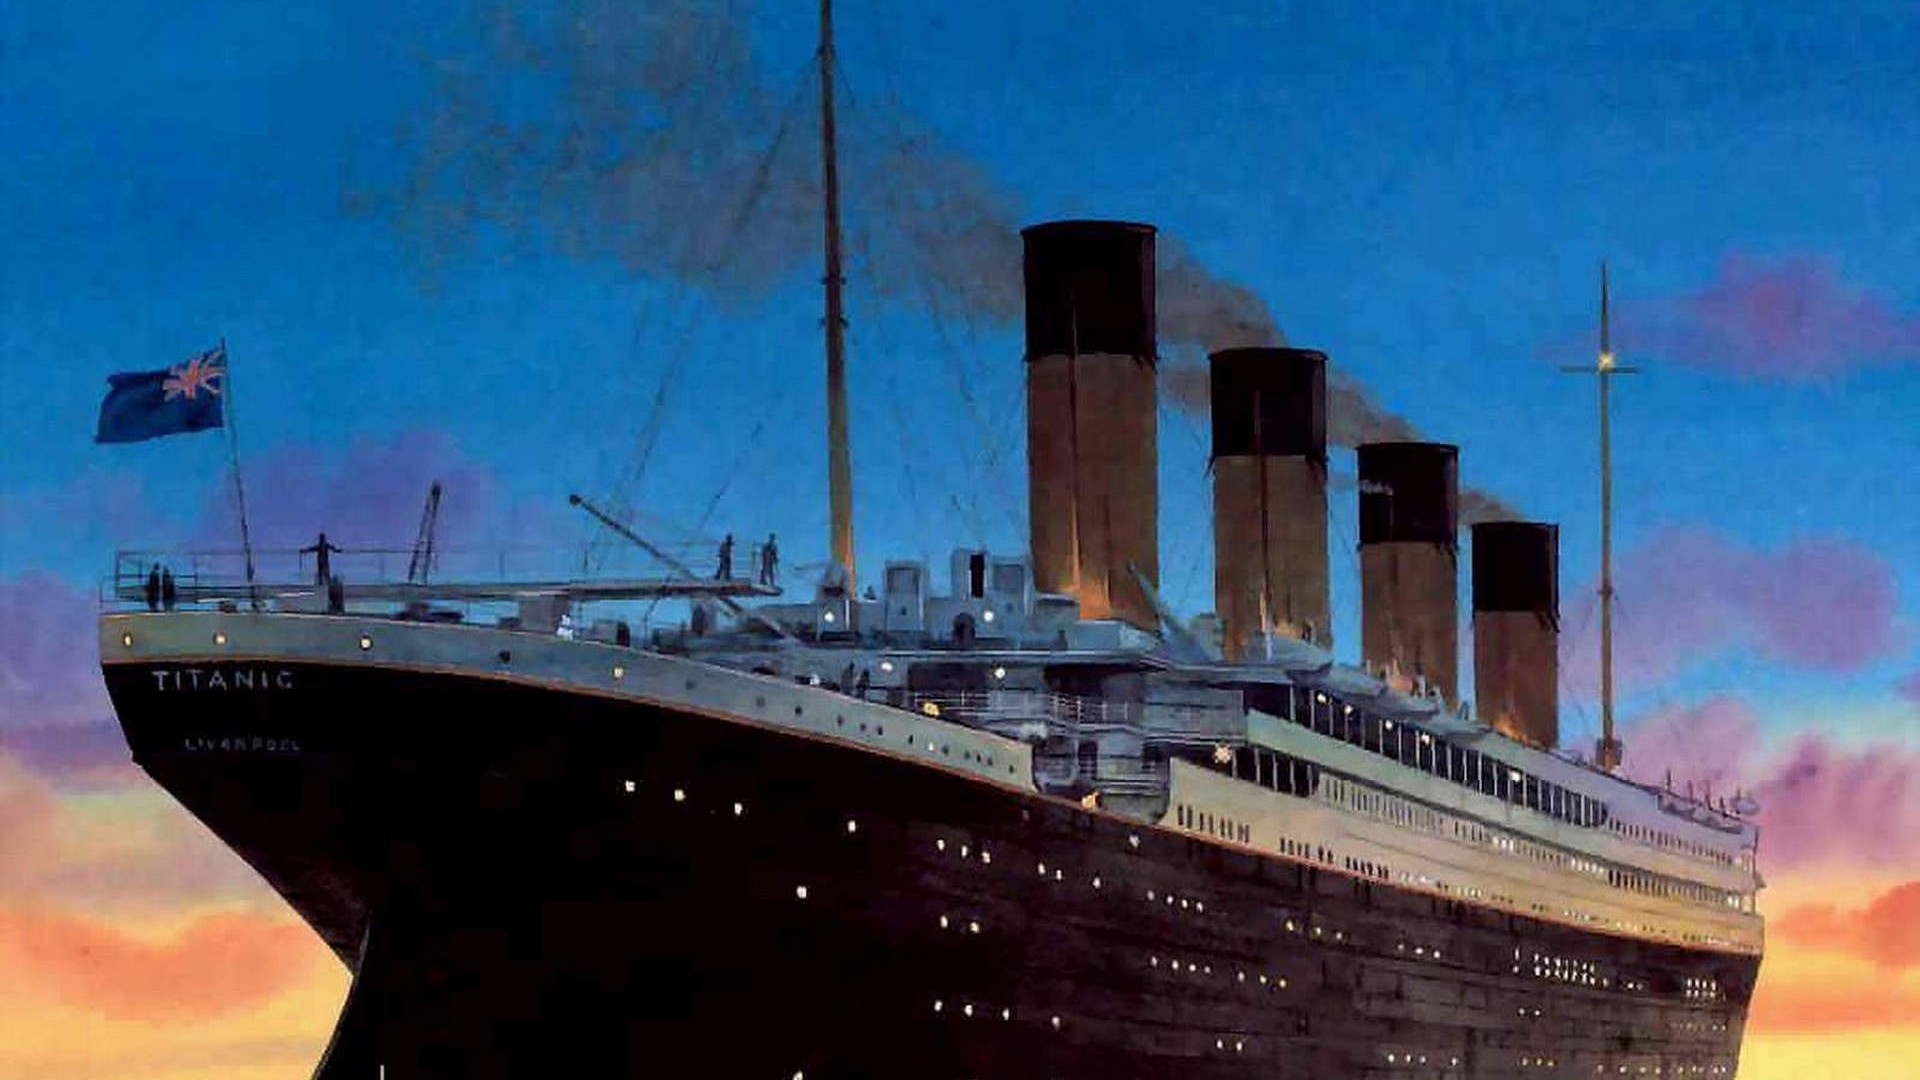 1920x1080 Titanic Sinking Ship Wrecks Boats Background Wallpapers on